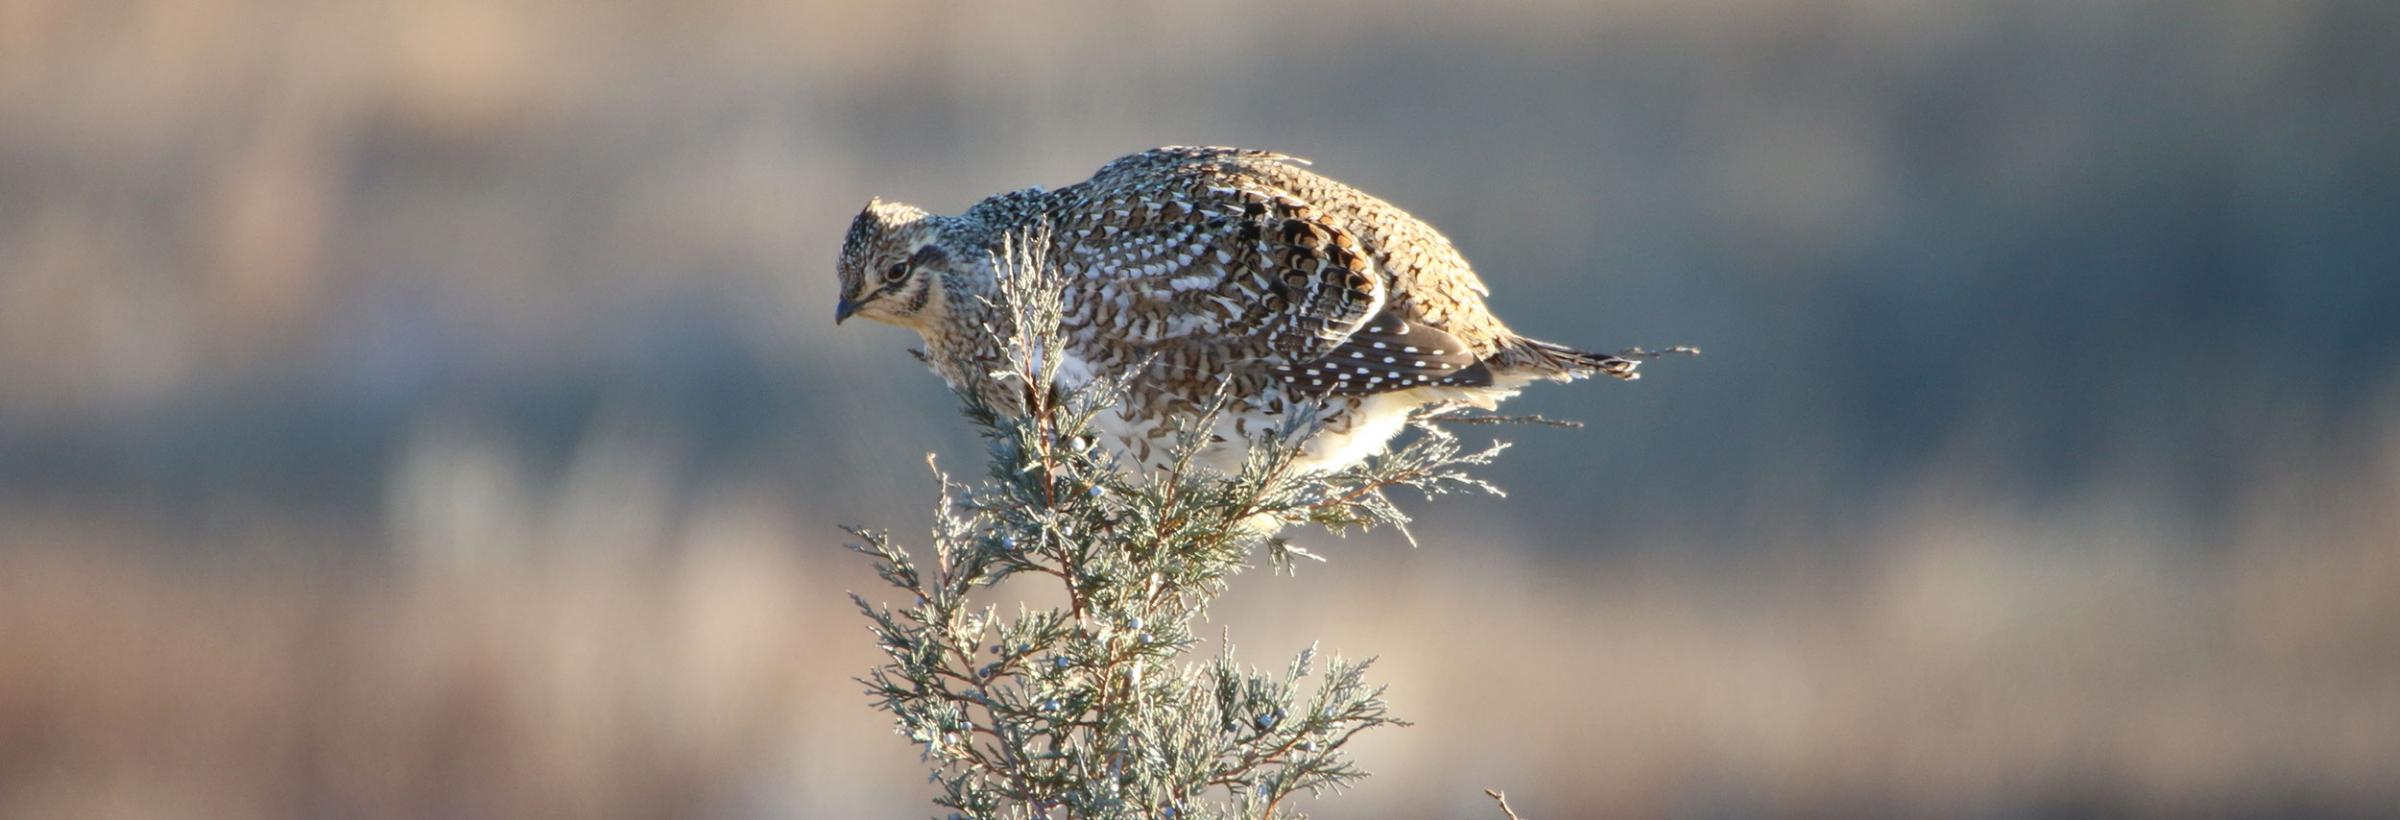 Sharp-tailed grouse in a tree